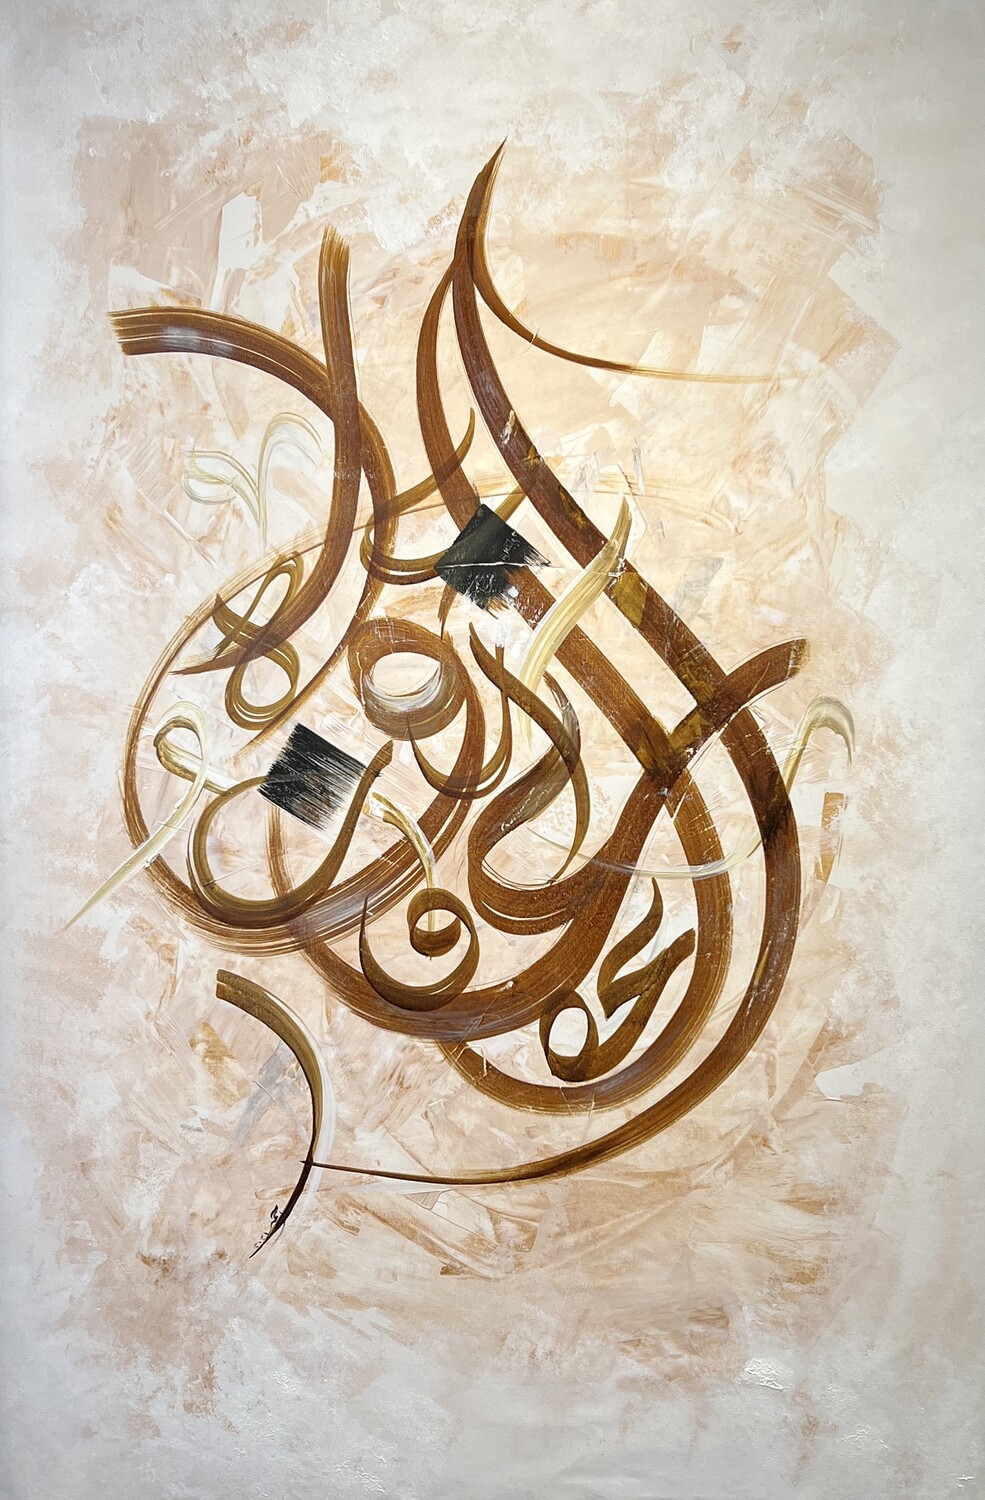 The All Forgiving - Name of Allah - Brown & Gold Abstract Calligraphy oil painting